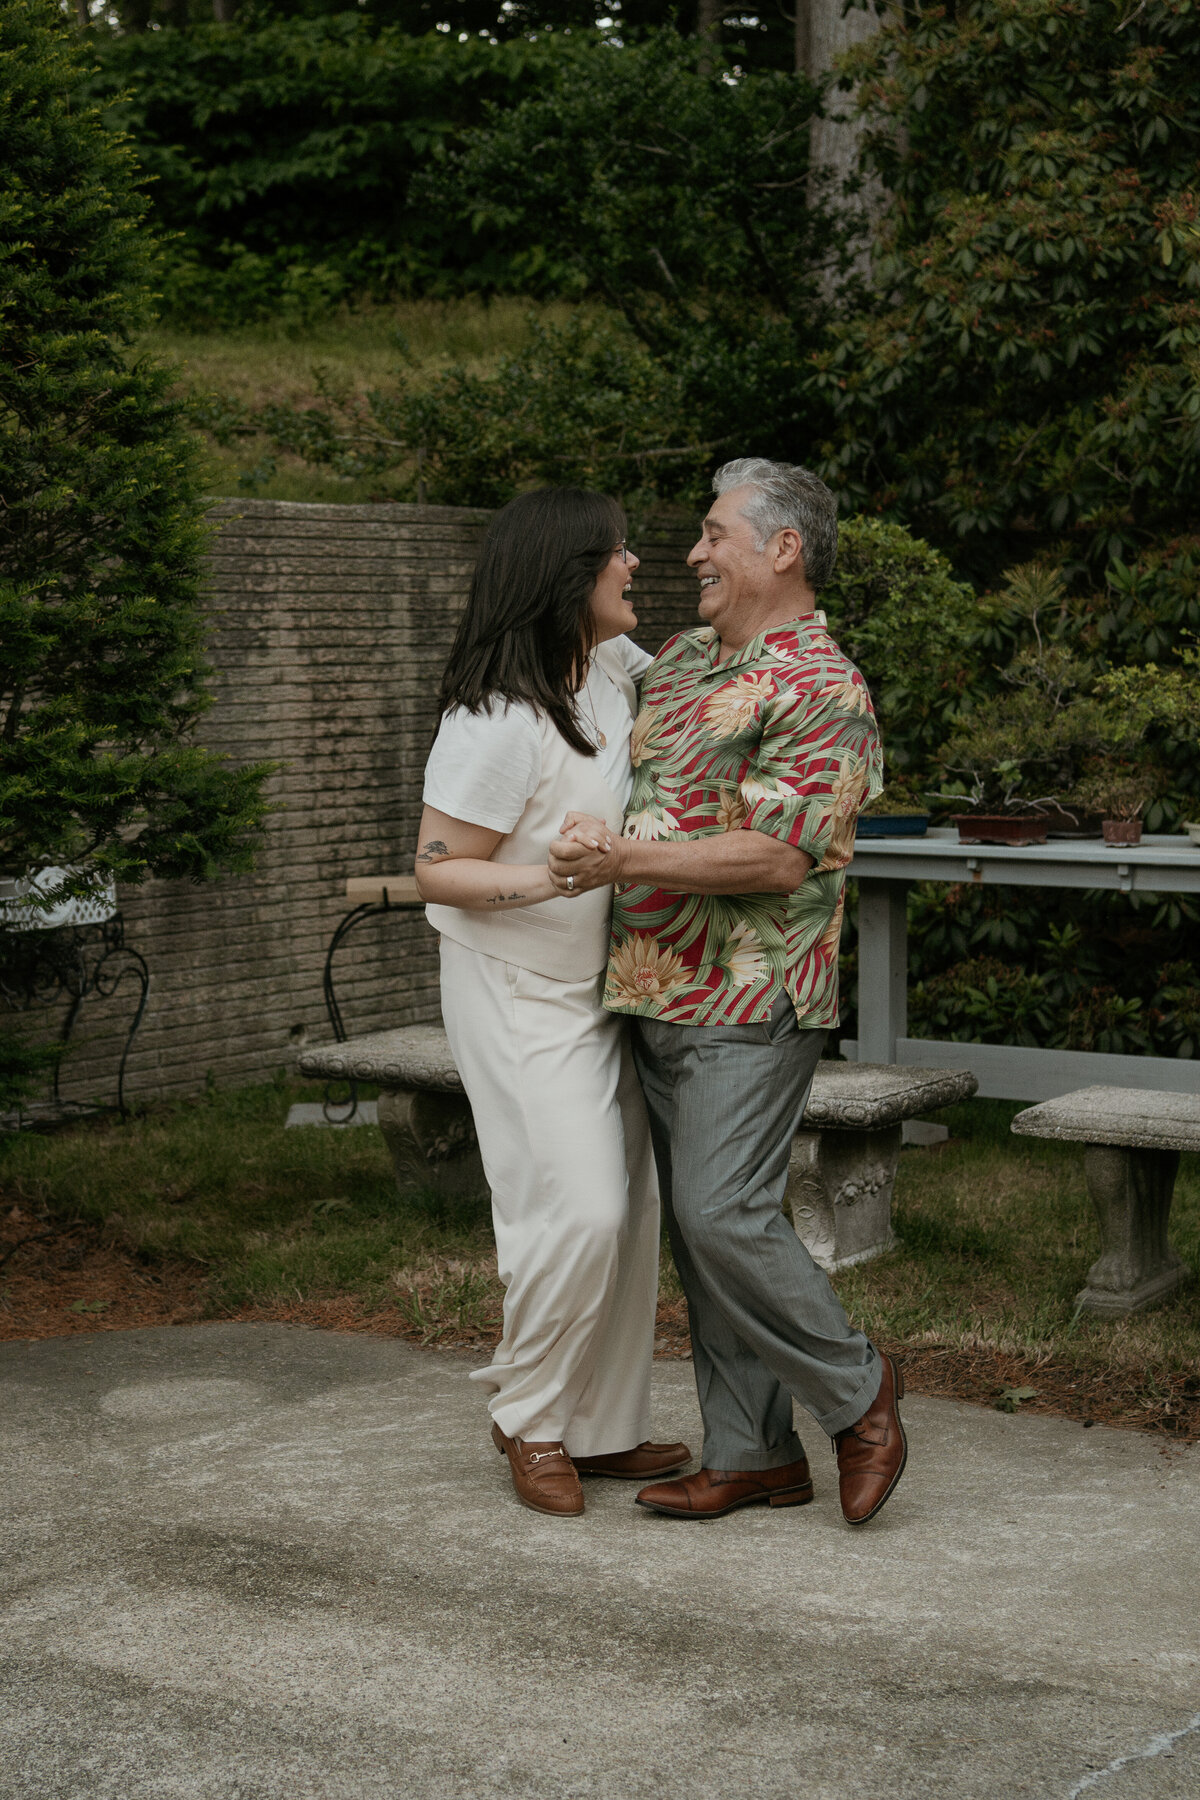 A joyful couple dances together outdoors, sharing a lighthearted moment. The woman, in a white outfit, and the man, in a colorful Hawaiian shirt and grey trousers, smile and laugh as they enjoy the dance. The lush greenery and stone benches in the background create a serene and relaxed atmosphere.